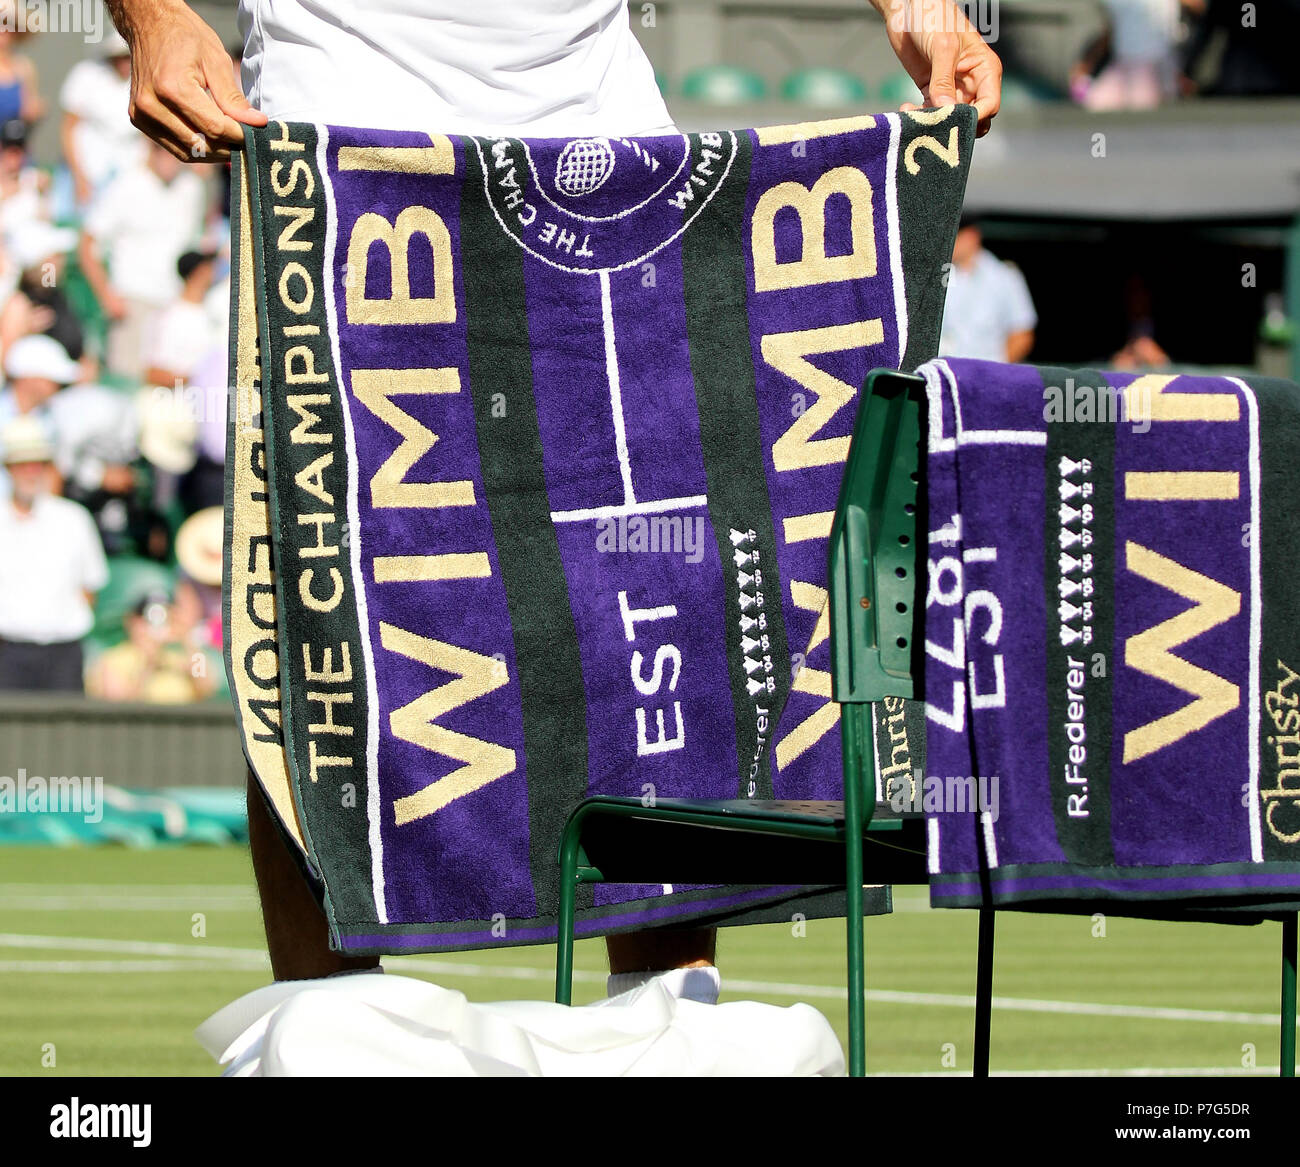 ROGER FEDERER , LIMITED EDITION TOWEL, THE WIMBLEDON CHAMPIONSHIPS 2018,  THE WIMBLEDON CHAMPIONSHIPS 2018 THE ALL ENGLAND TENNIS CLUB, 2018 Stock  Photo - Alamy